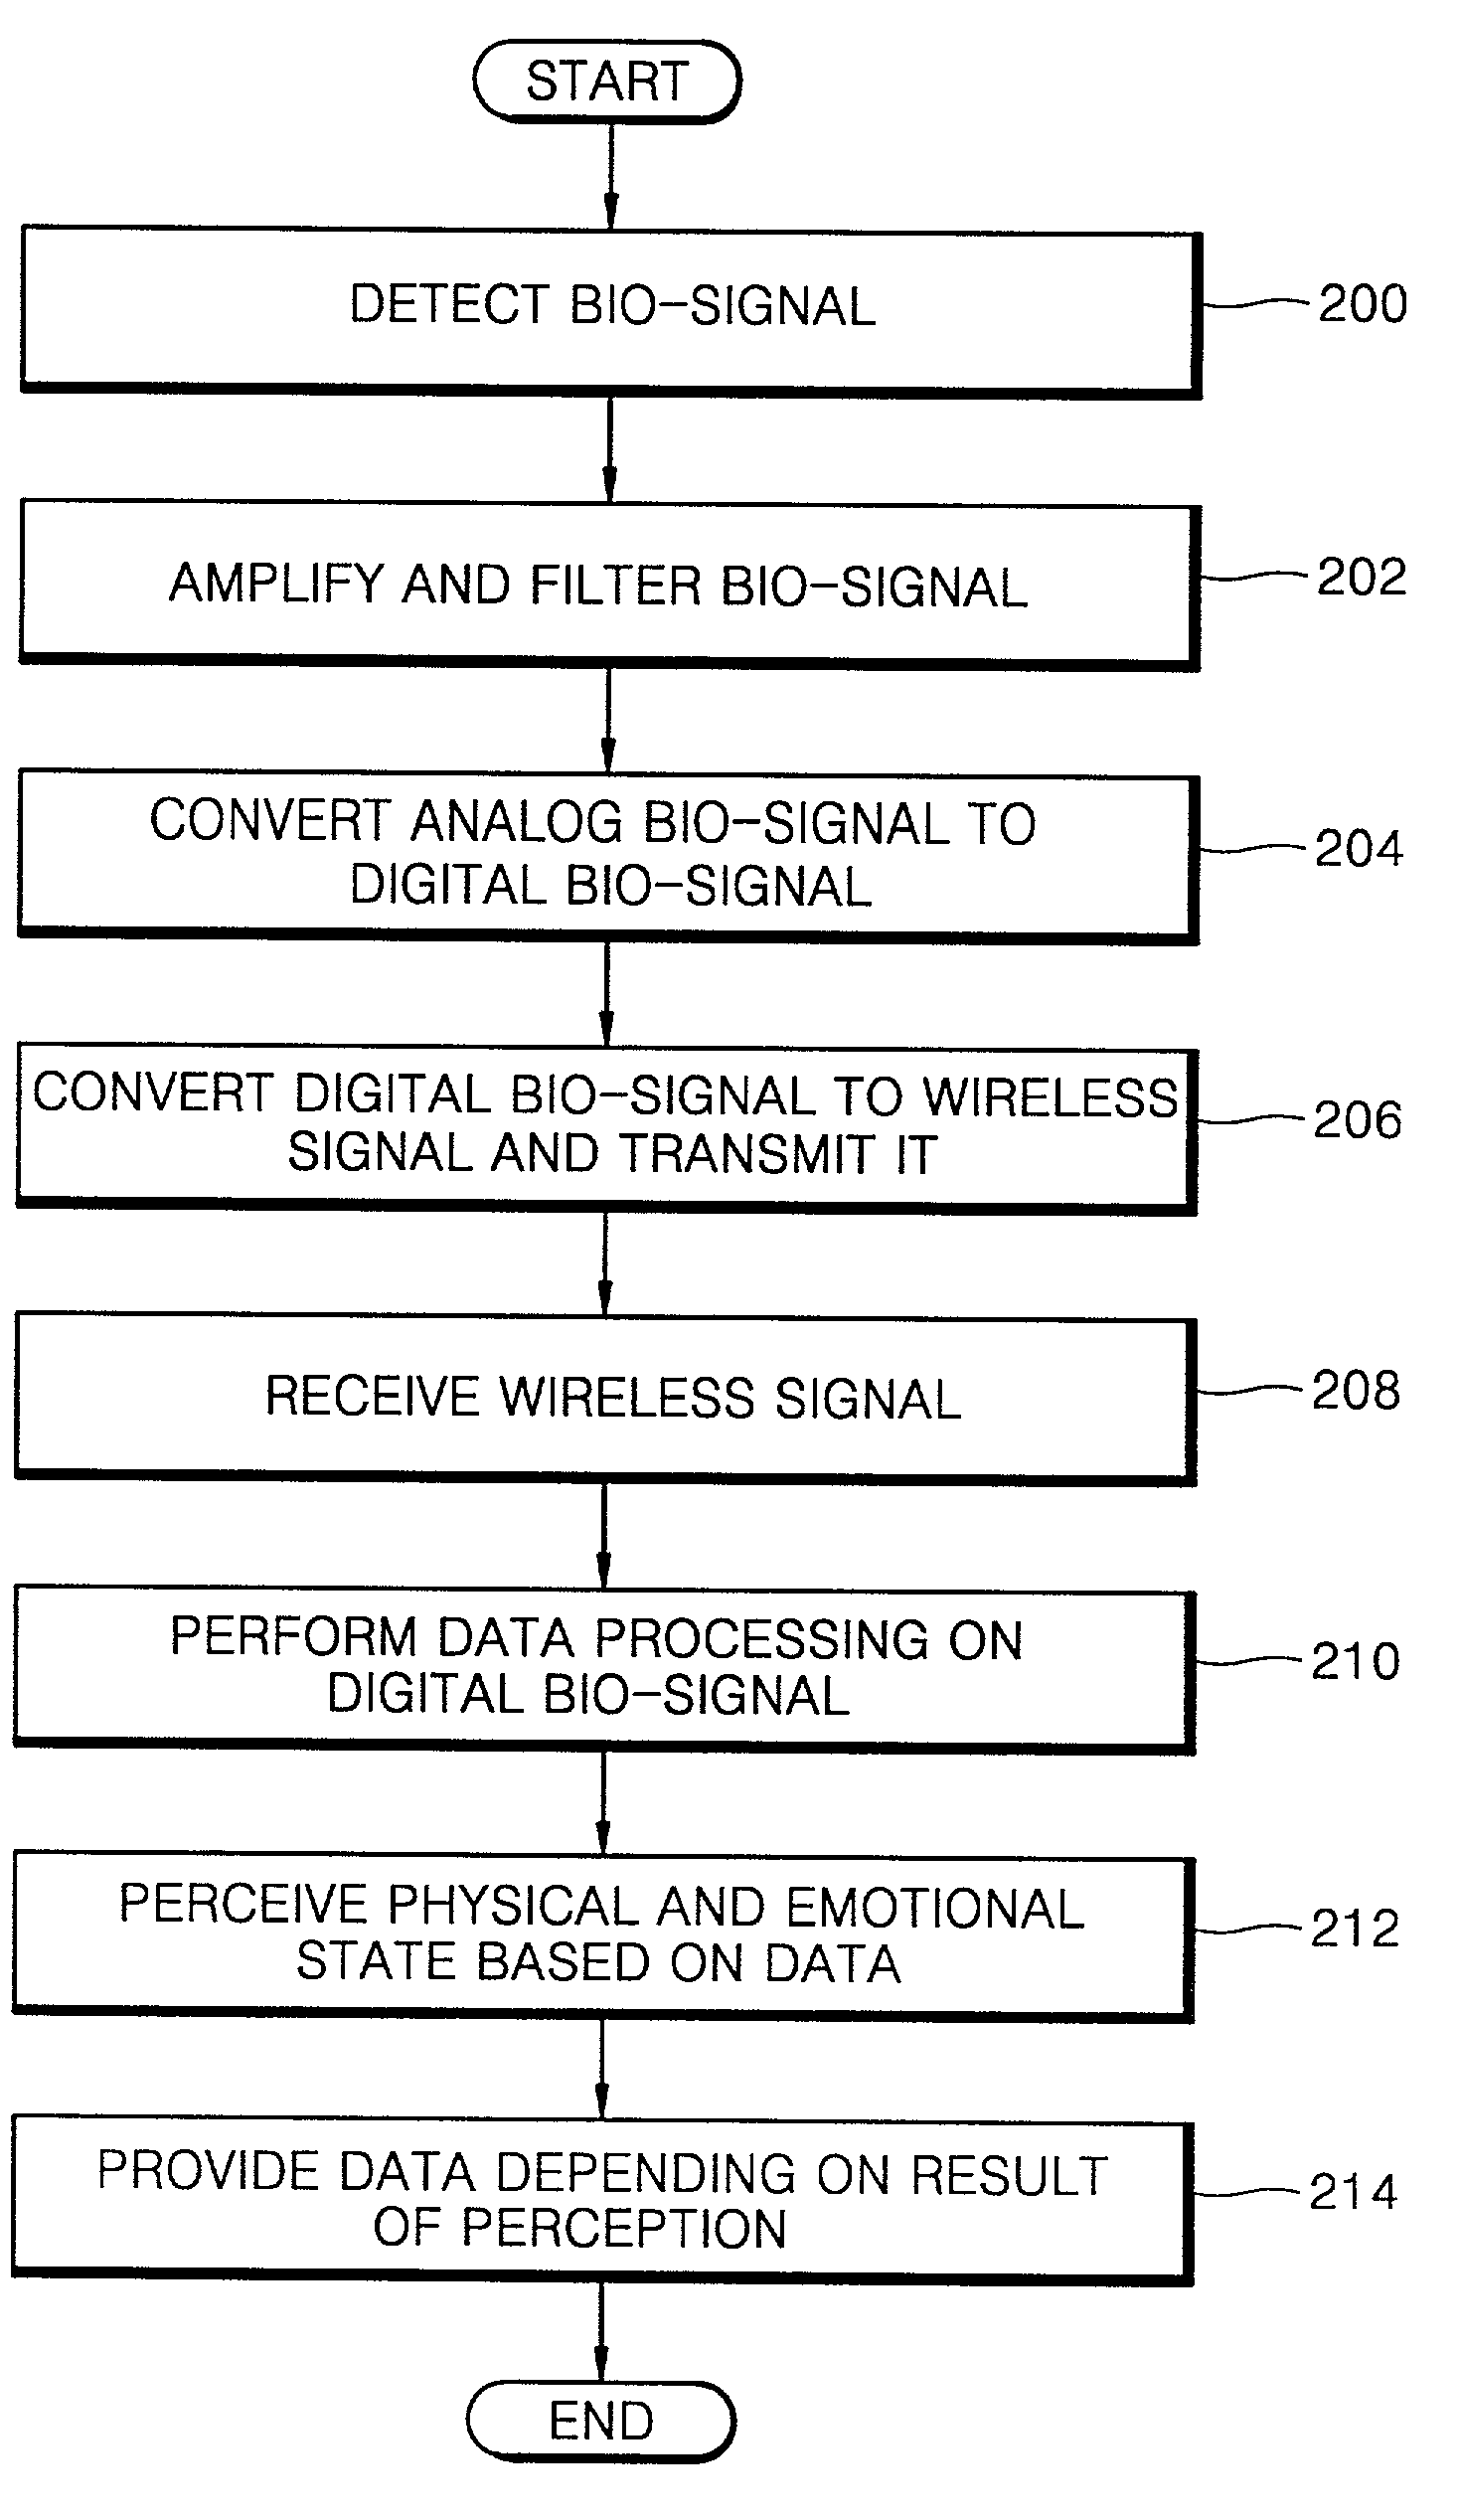 Apparatus and method for perceiving physical and emotional state